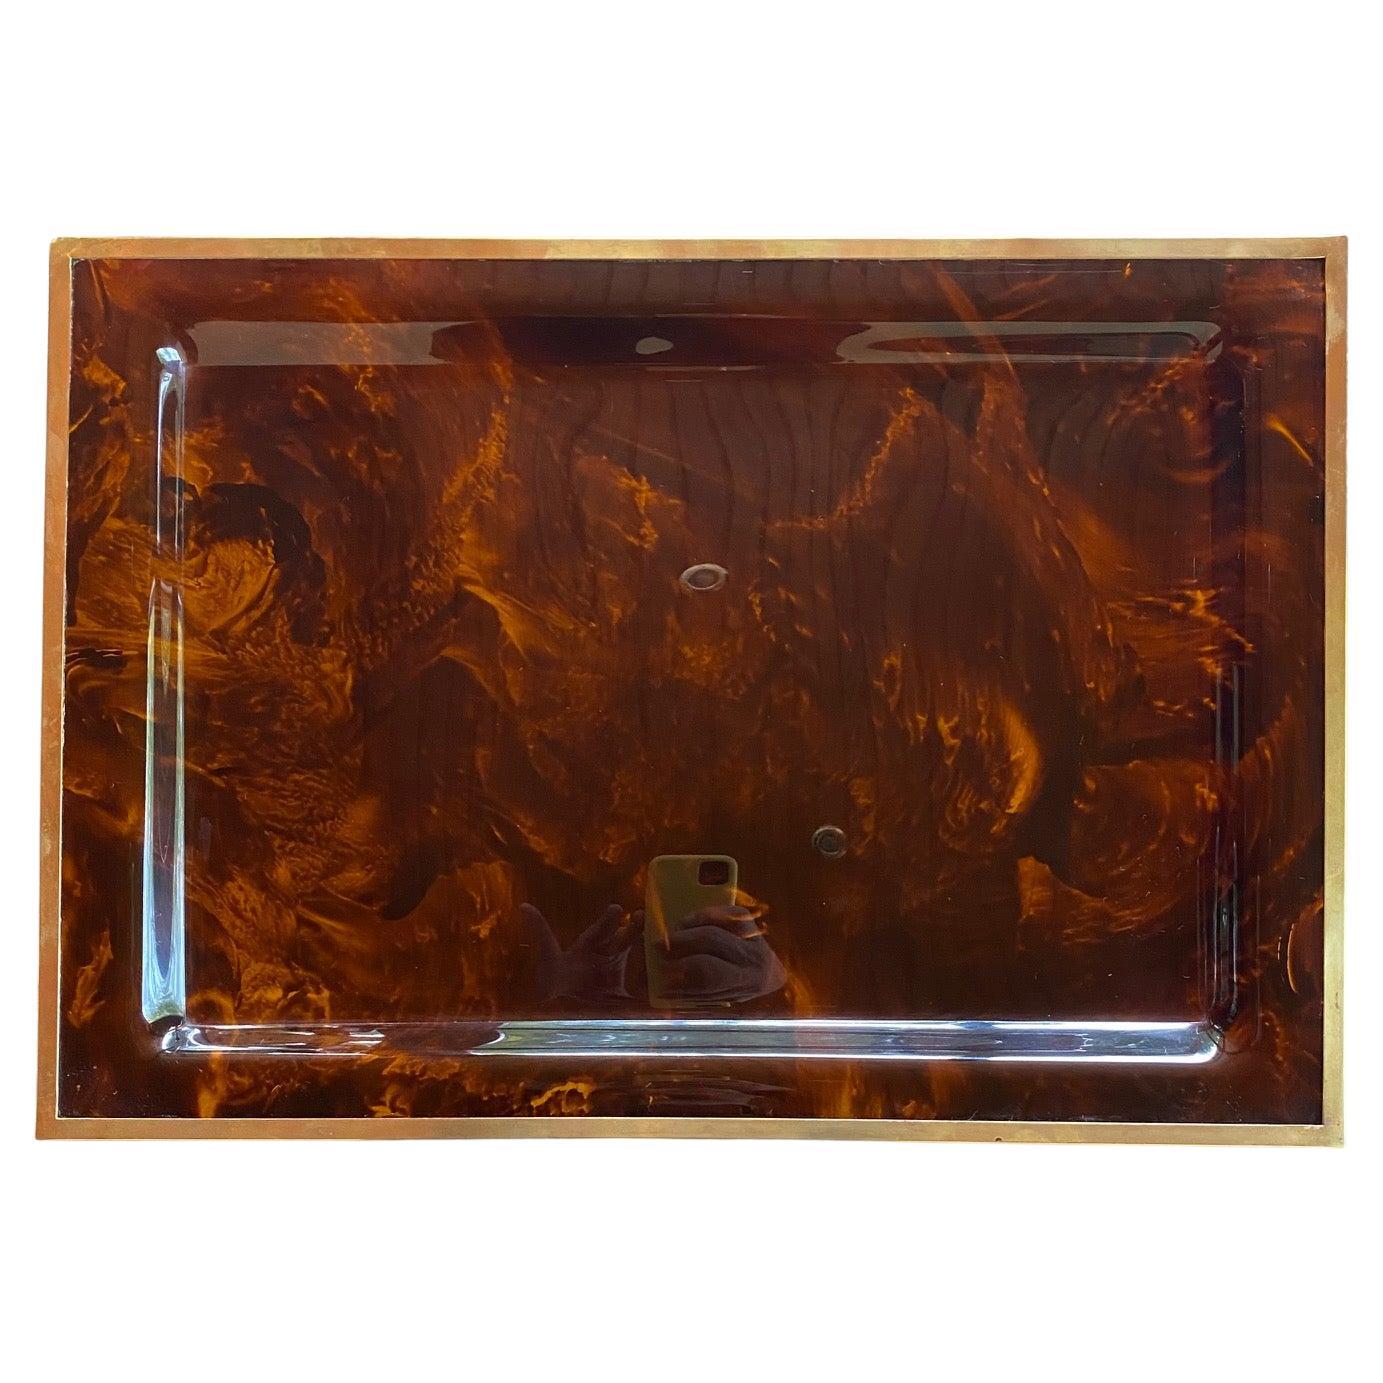 Serving Tray in Tortoiseshell Lucite and Brass Christian Dior Style, France 70s